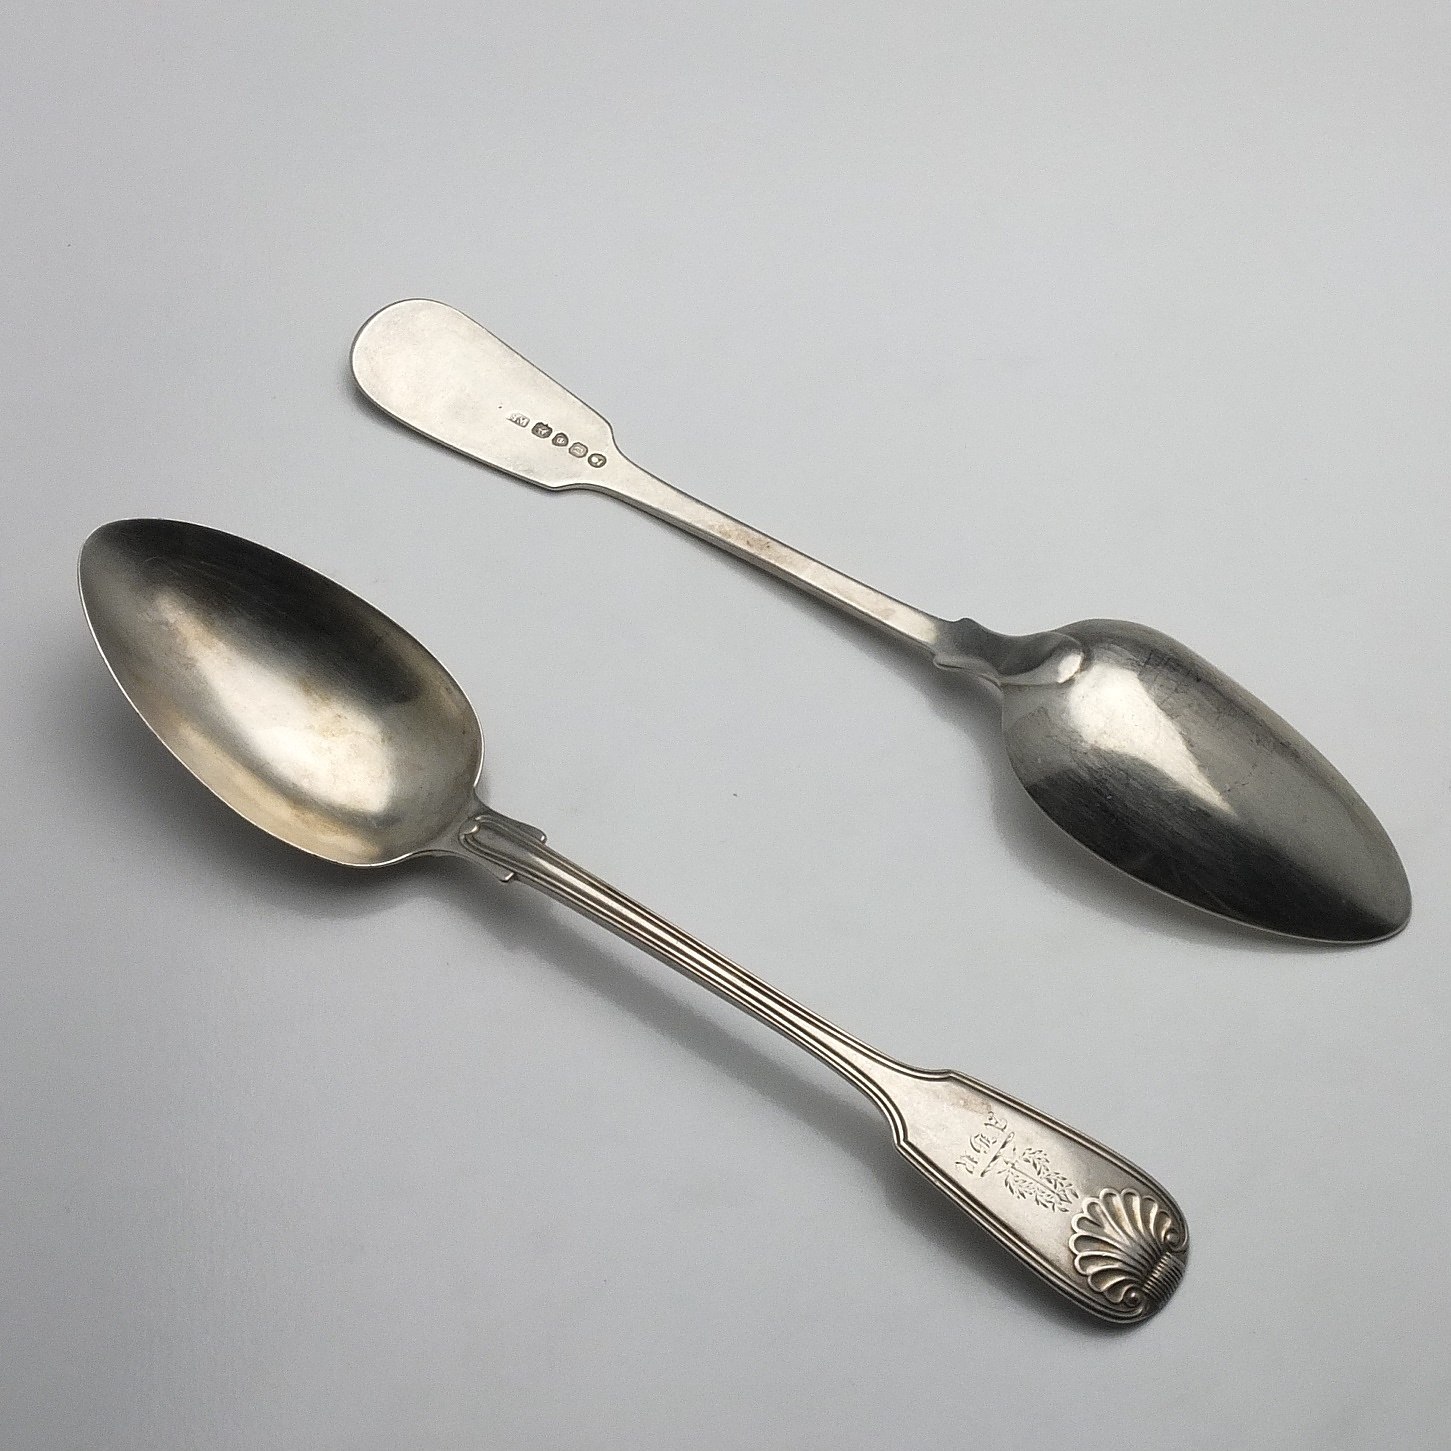 'Pair of Georgian Crested and Monogrammed Sterling Silver Serving Spoons William Schofield London 1828'